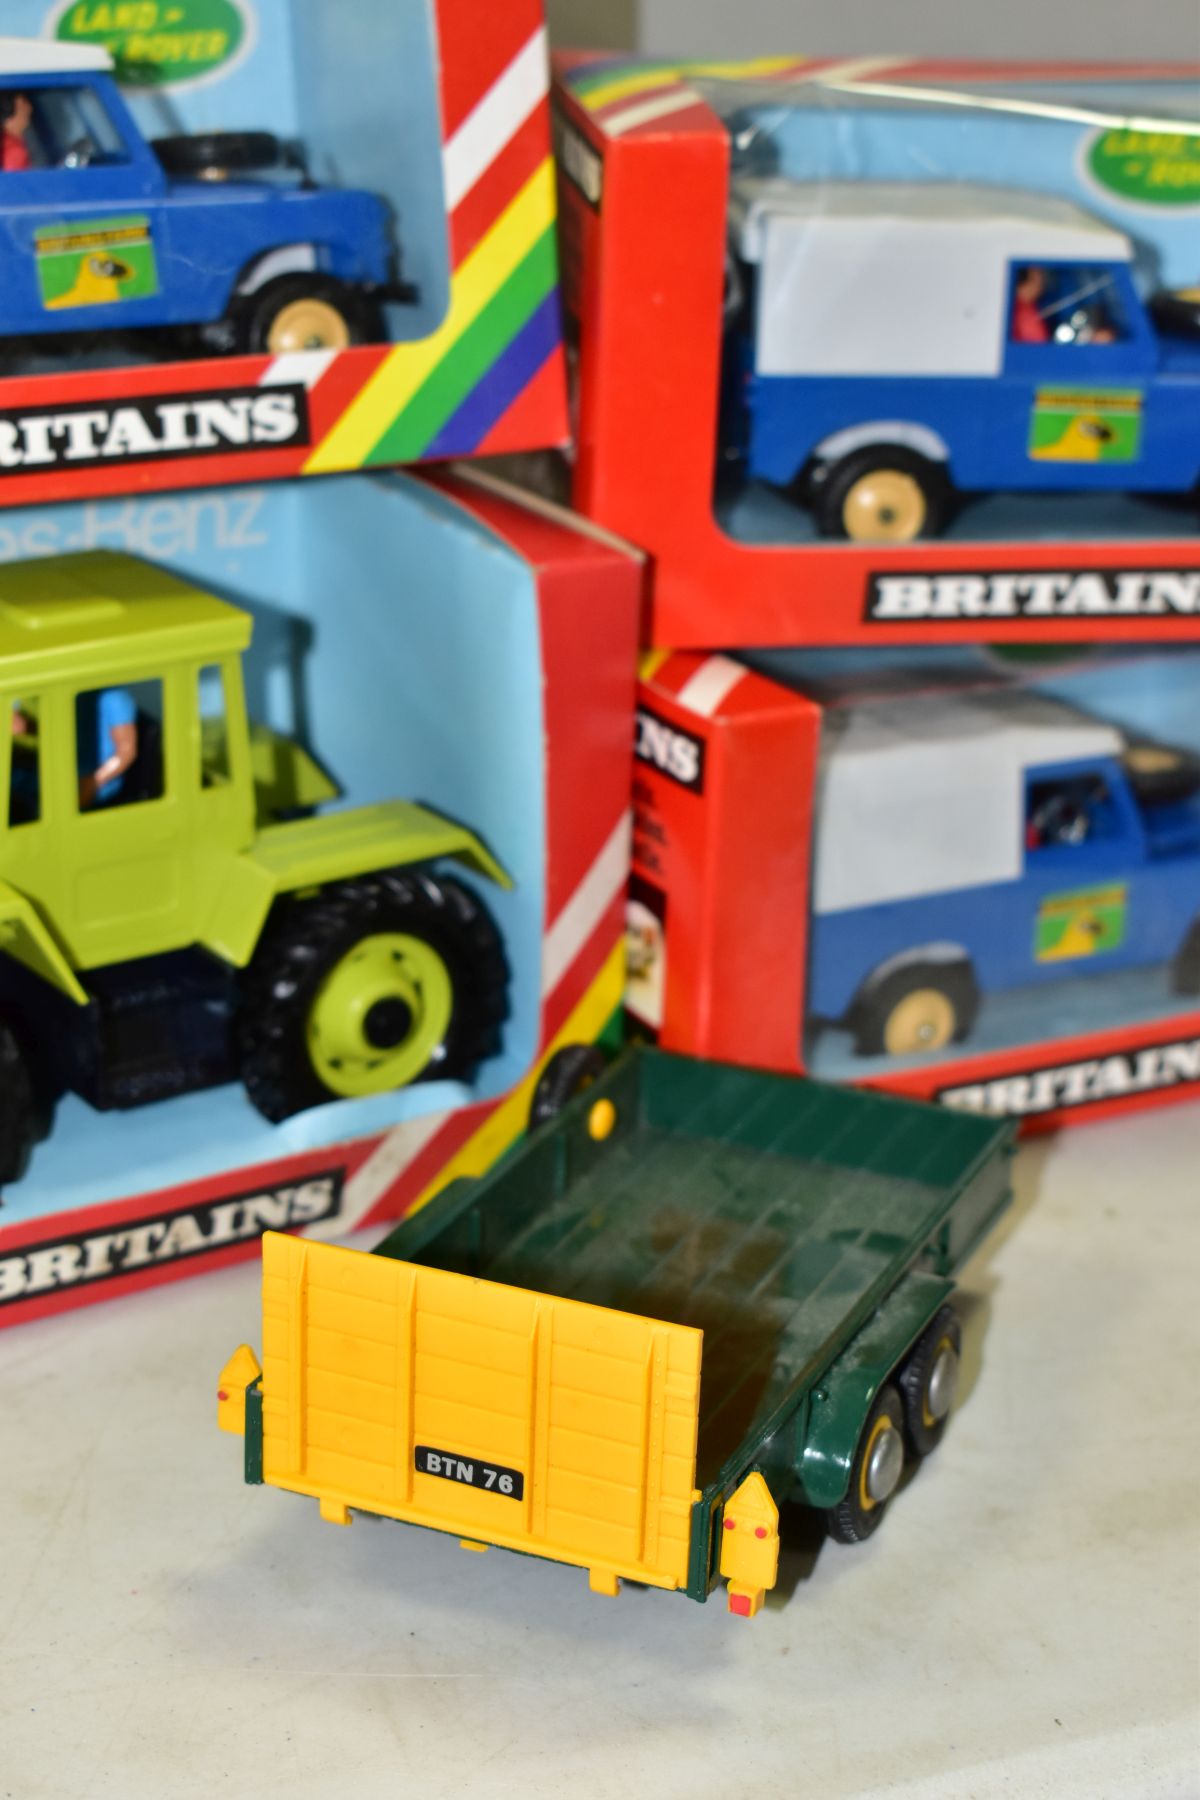 THREE BOXED BRITAINS FARM LAND ROVER MODELS, No.9571, appear complete and look to have hardly - Image 2 of 3